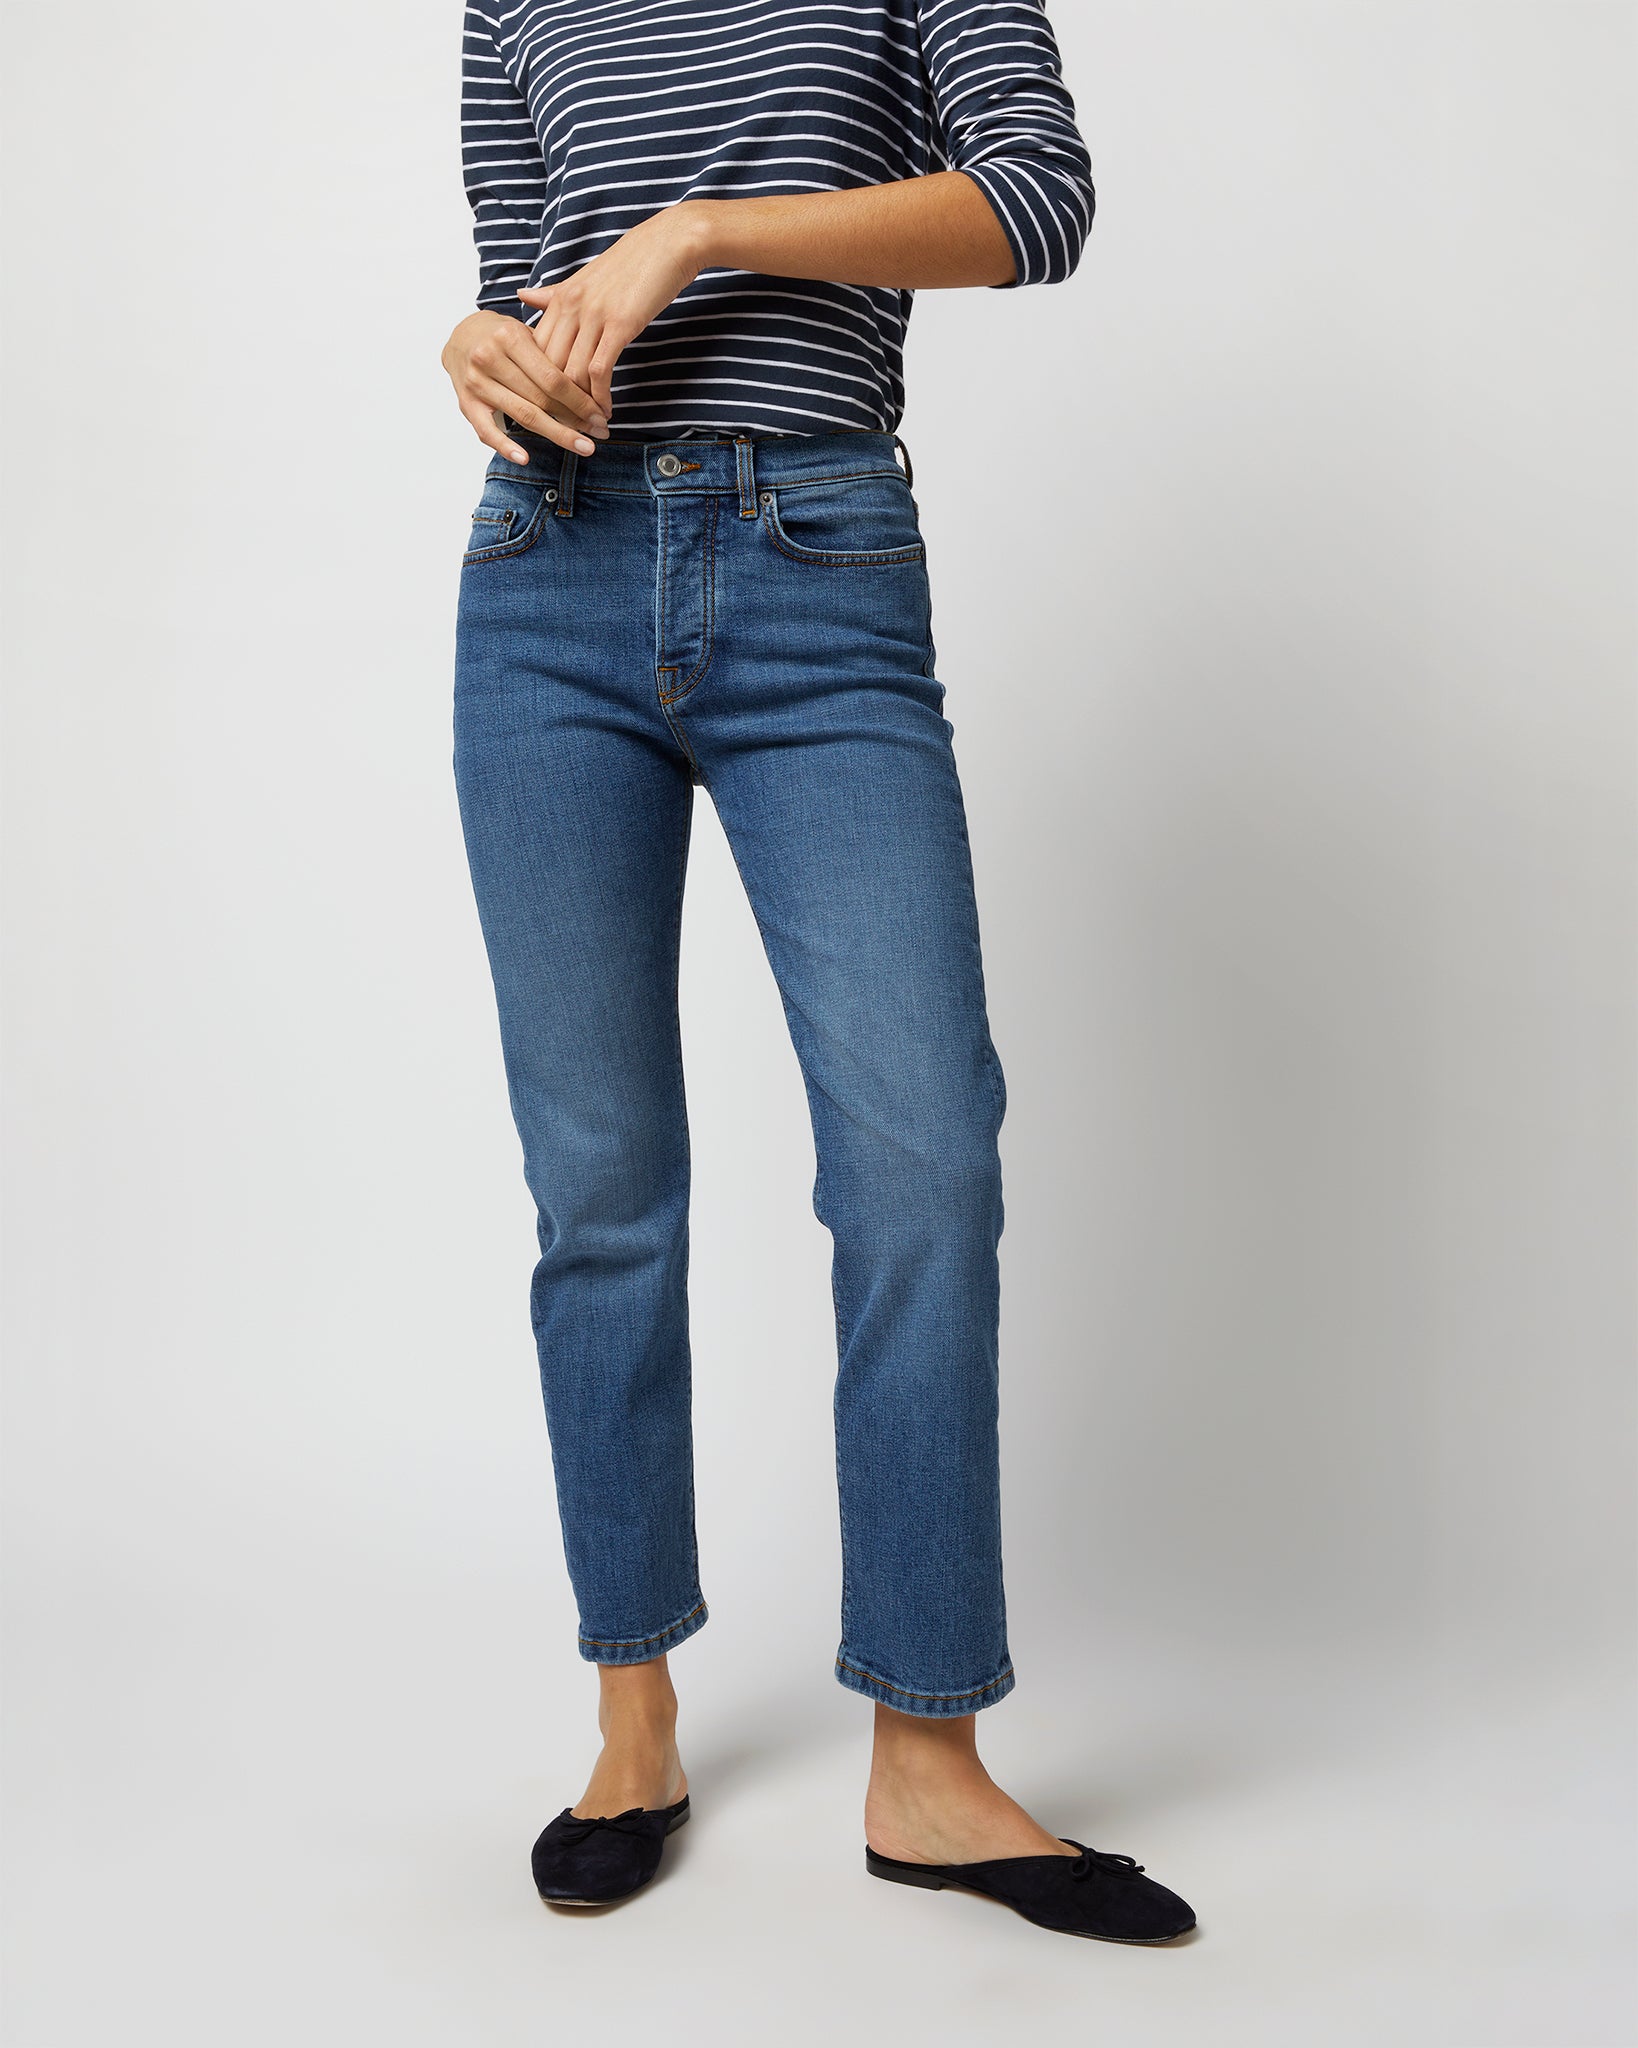 Classic Jean in Mid Vintage